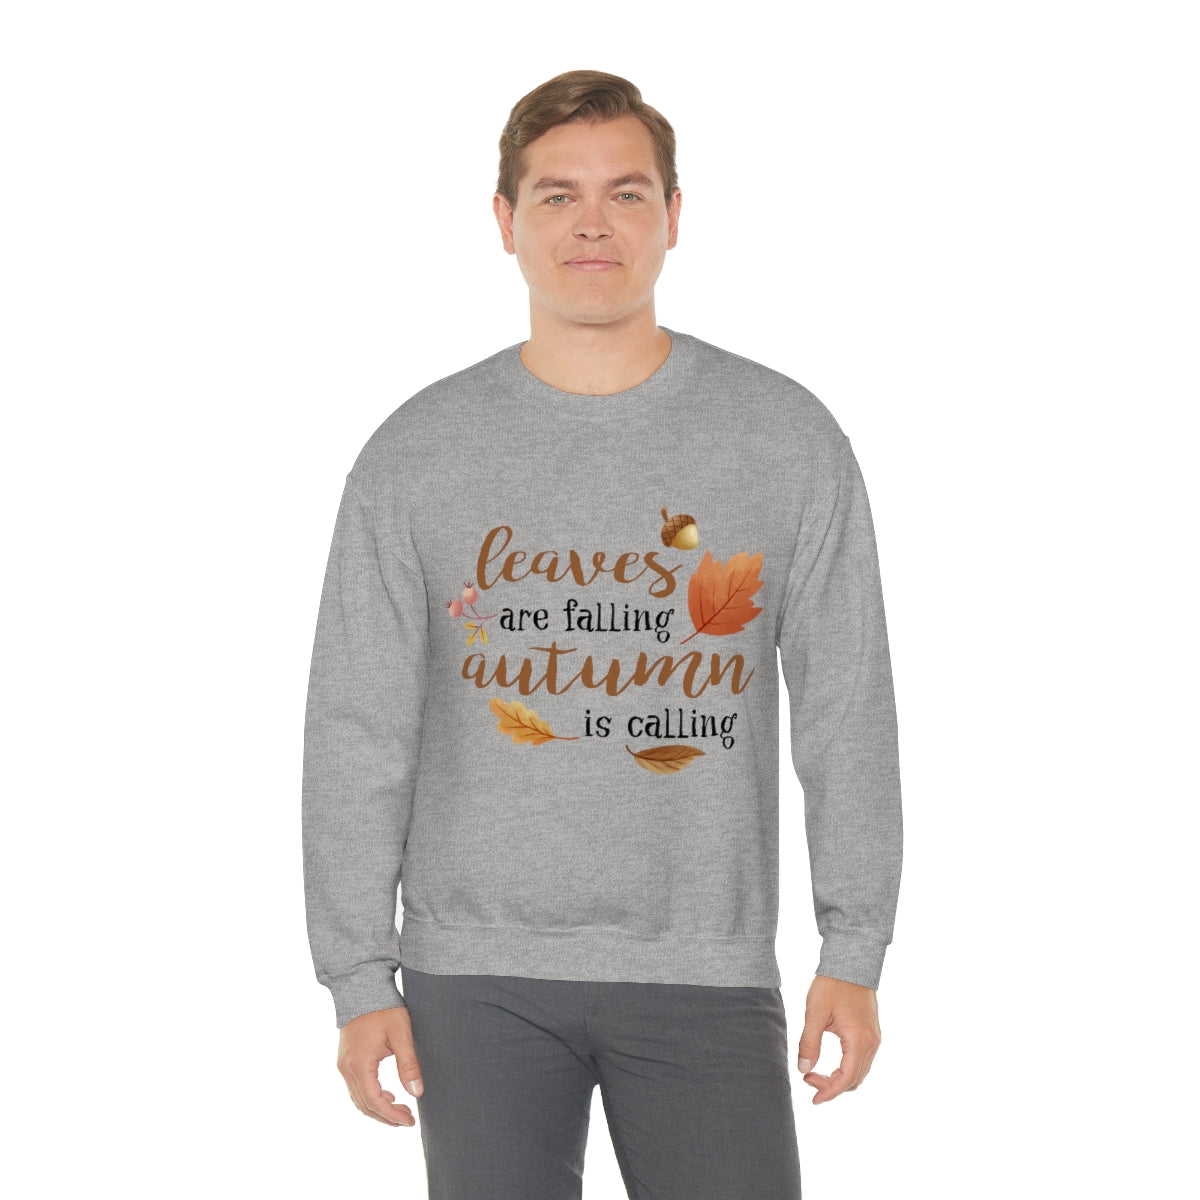 FALL SWEATSHIRT, Leaves are Falling Autumn is Calling, Autumn Seweatshirt, Unisex Fall Crewneck Sweatshirt, Halloween Party Shirt